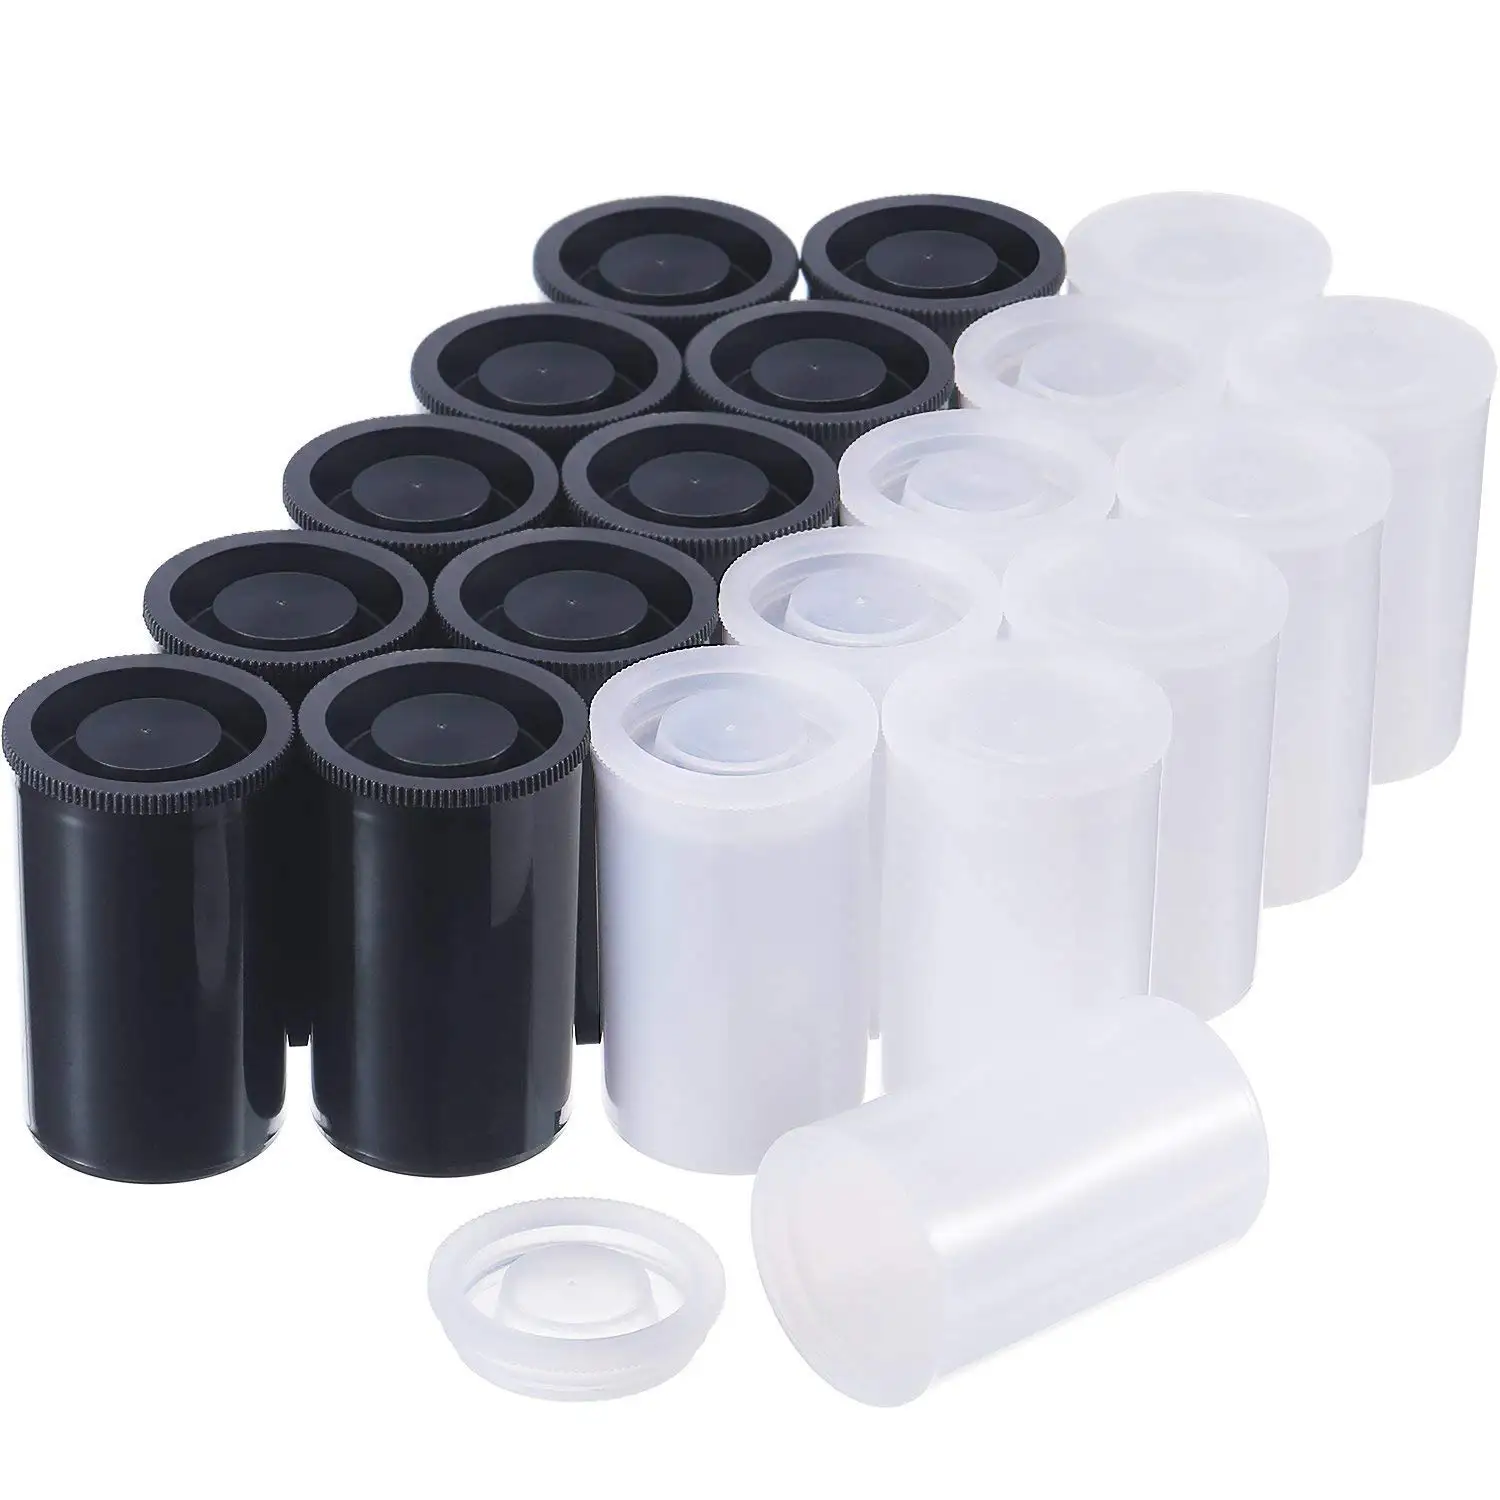 10PCS X 33MM Plastic Empty Film Canister Camera Reel Container Storage Case Can for Accessories Art Bead Coin Pill Fishing Bait